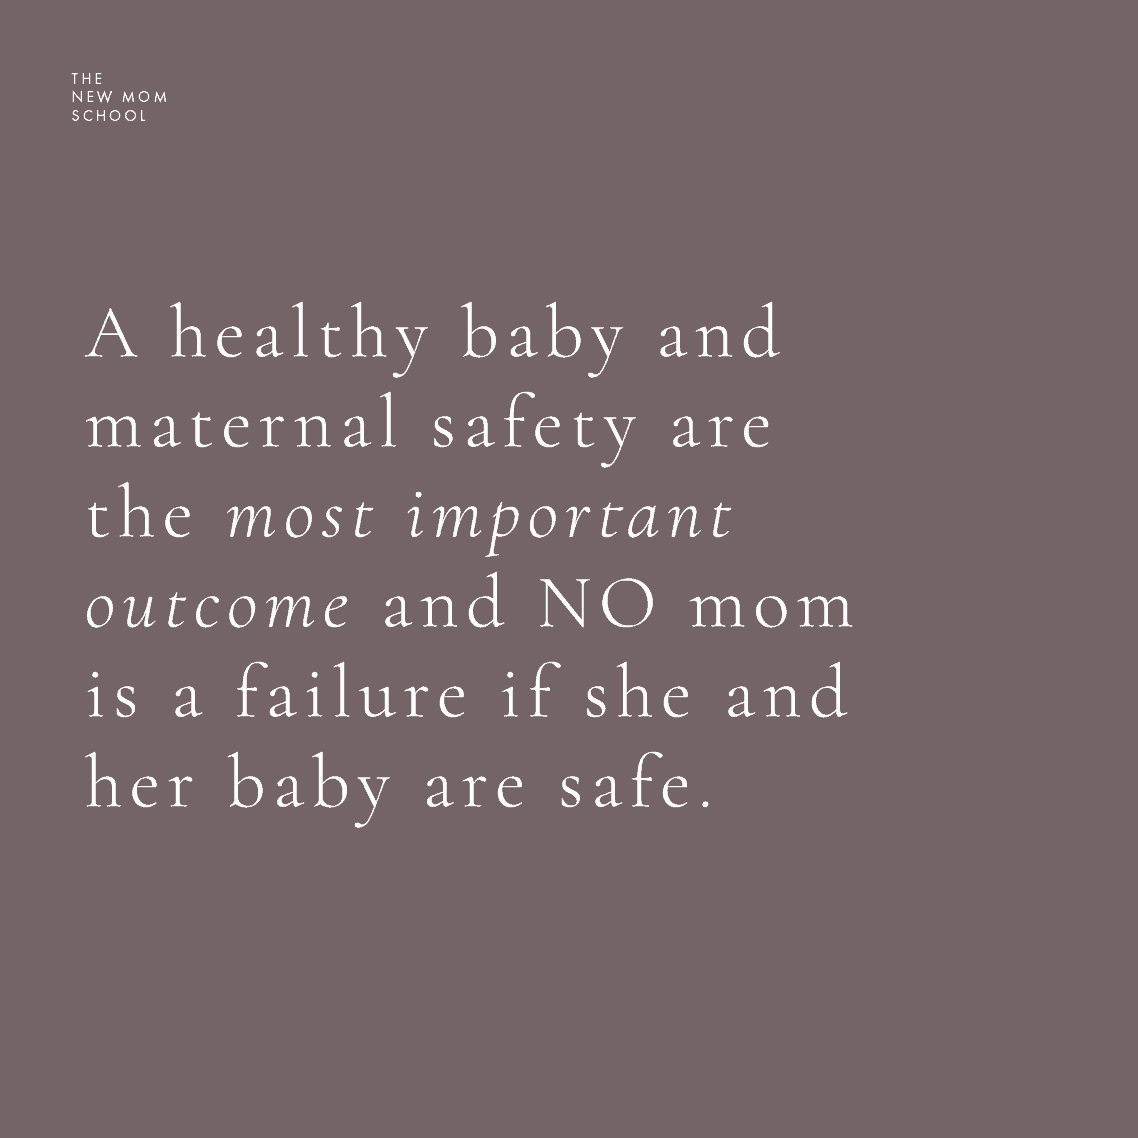 A healthy baby and maternal safety are the most important outcome and NO mom is a failure if she and her baby are safe.